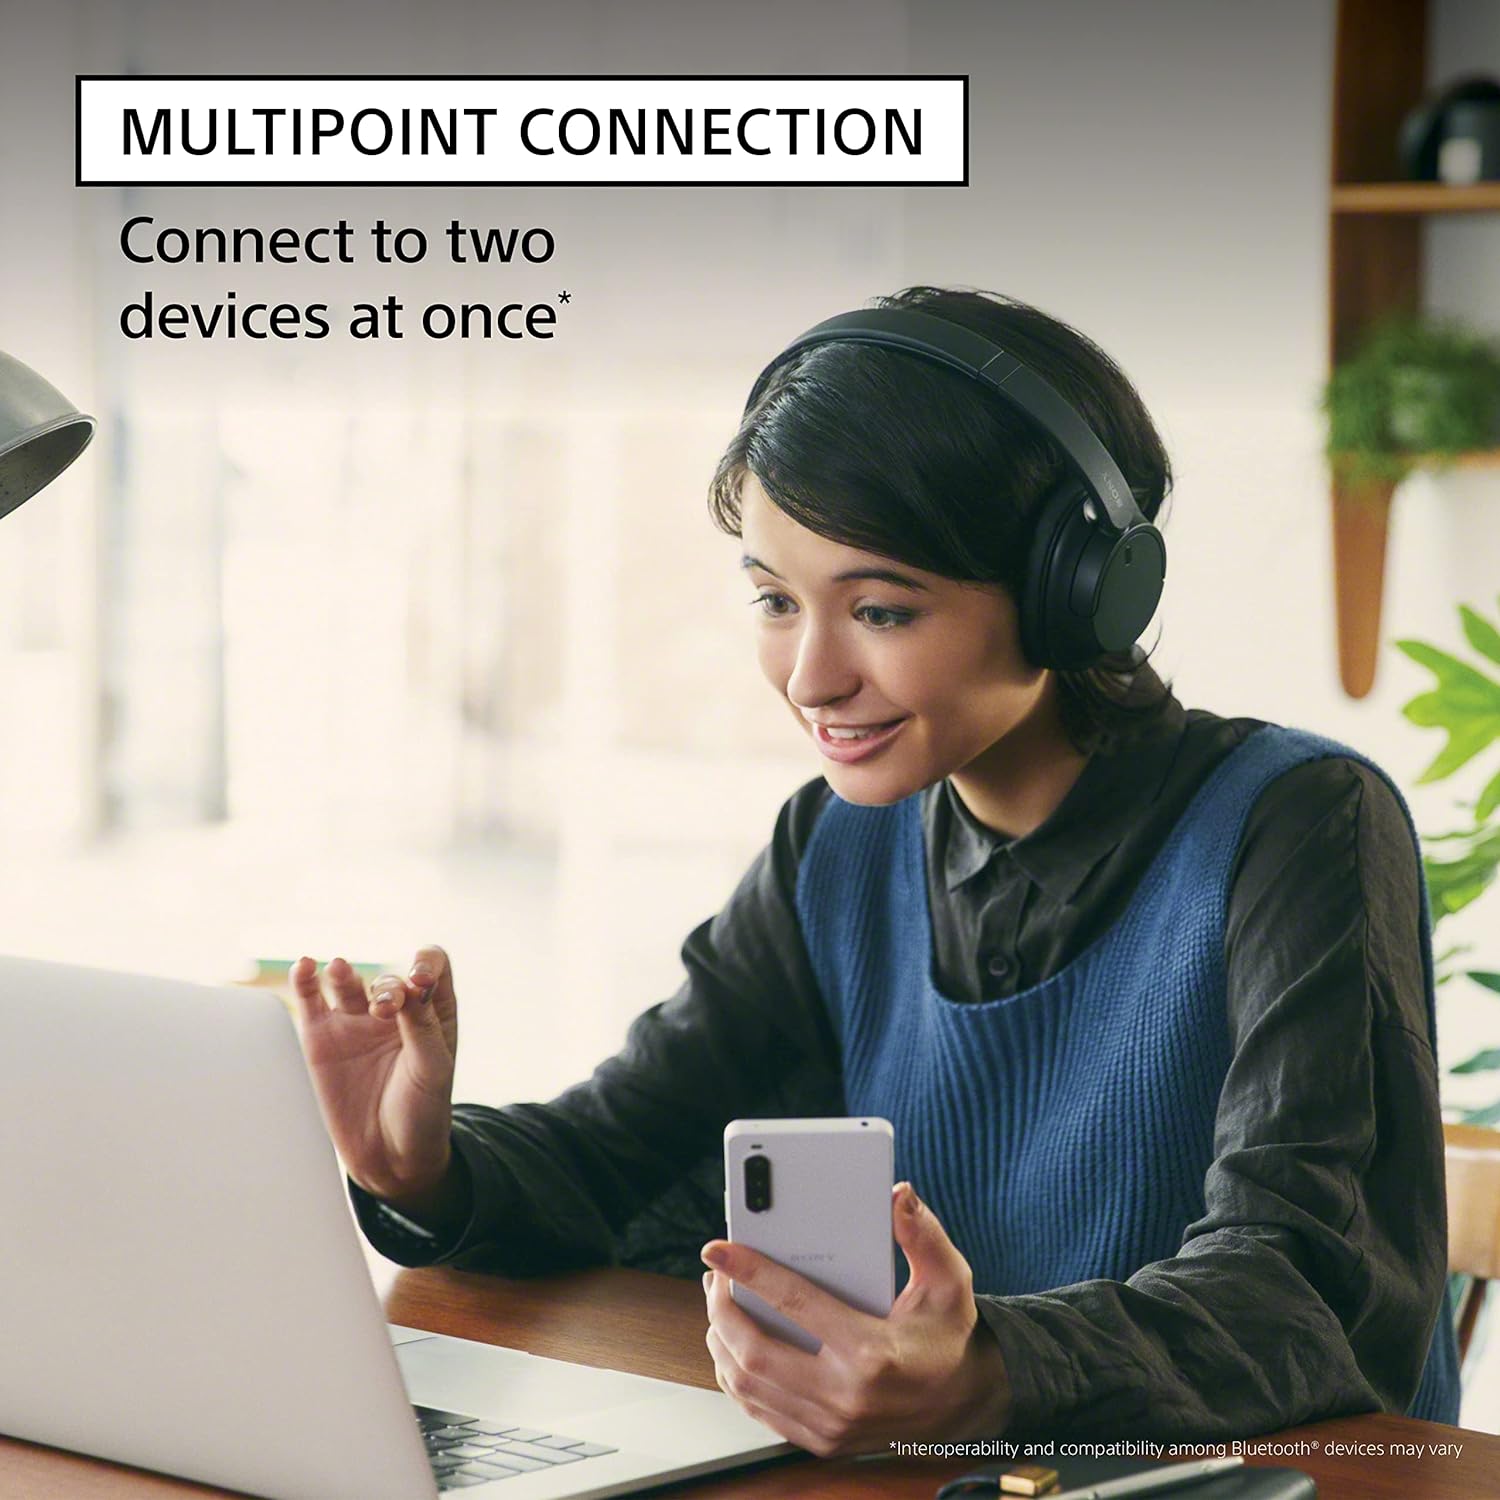 Sony WH-CH720N wireless headphones with multipoint connection allowing connection to two devices simultaneously